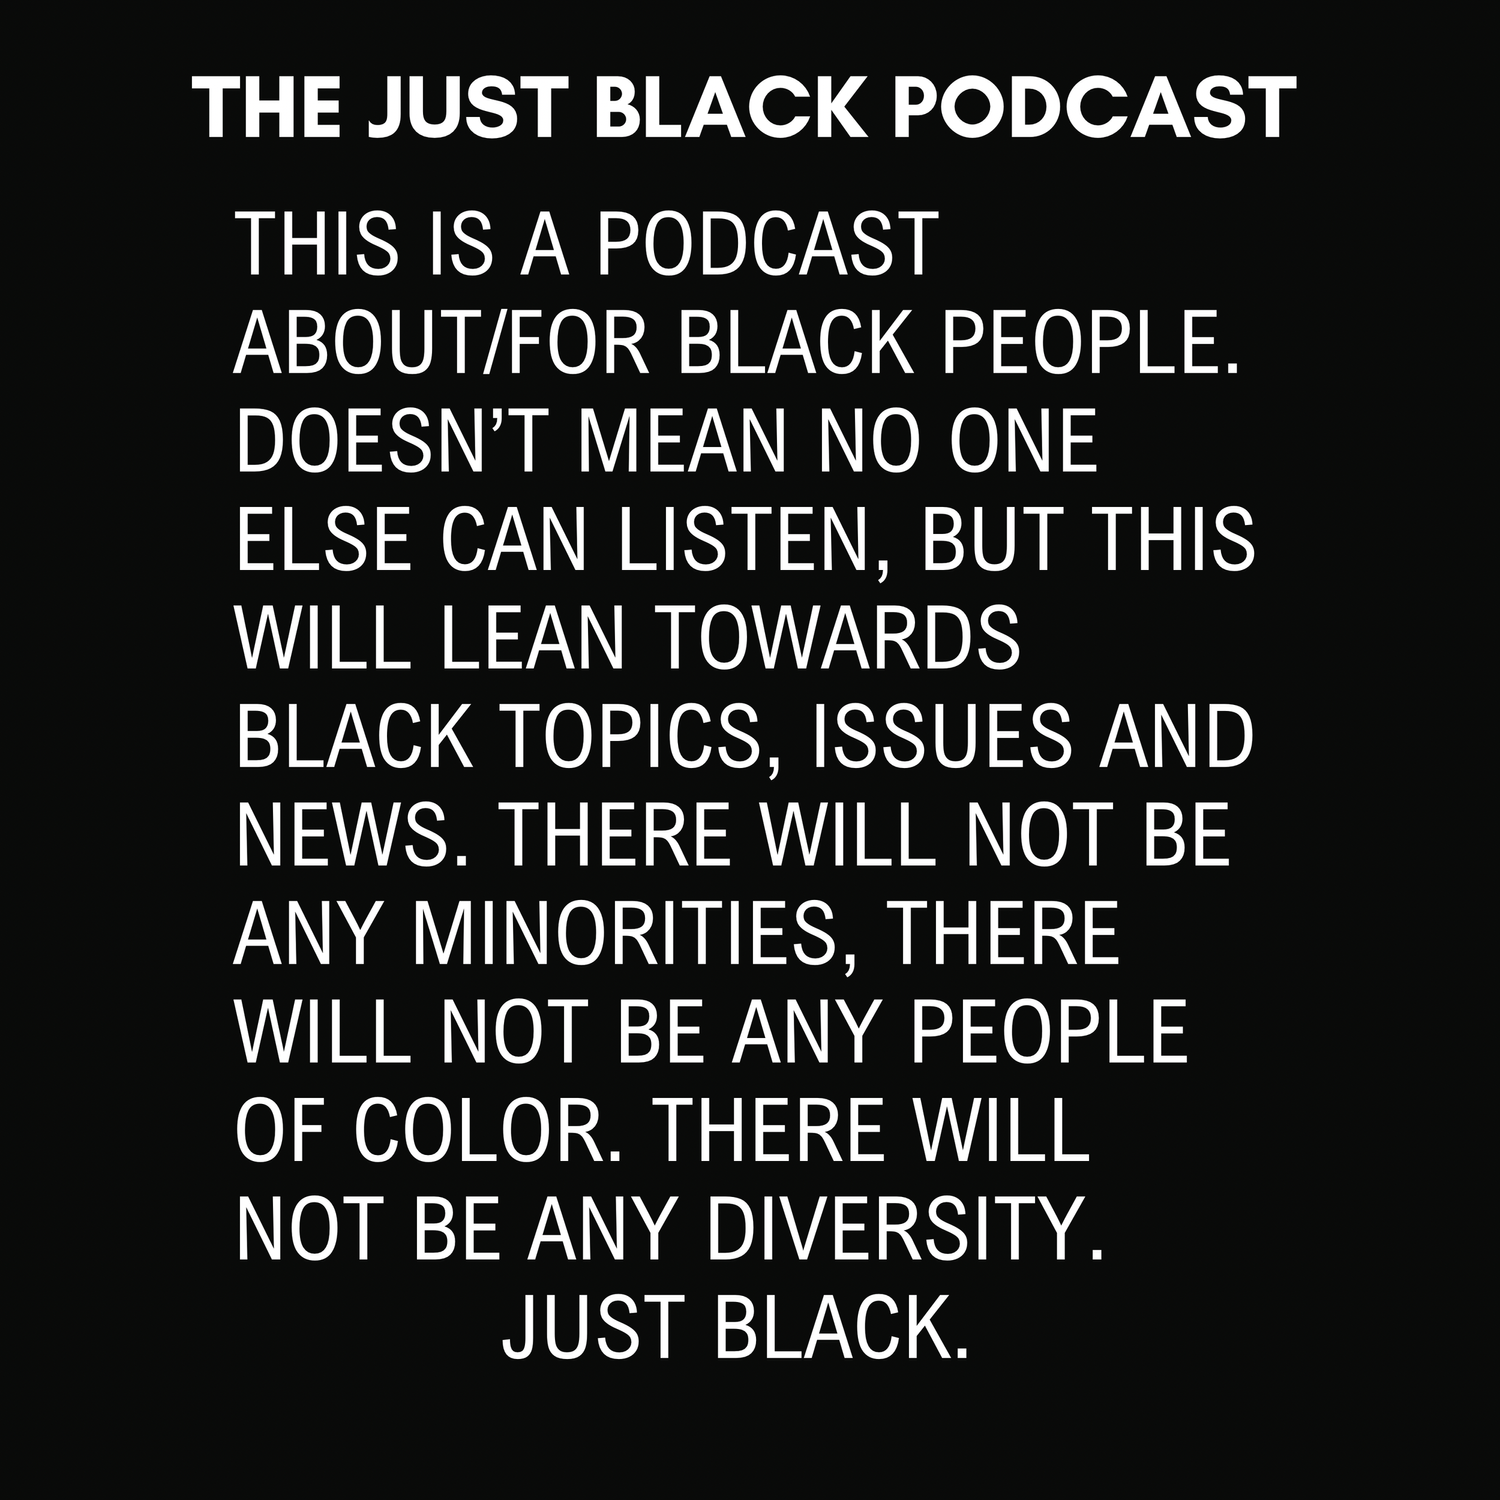 The Just Black Podcast